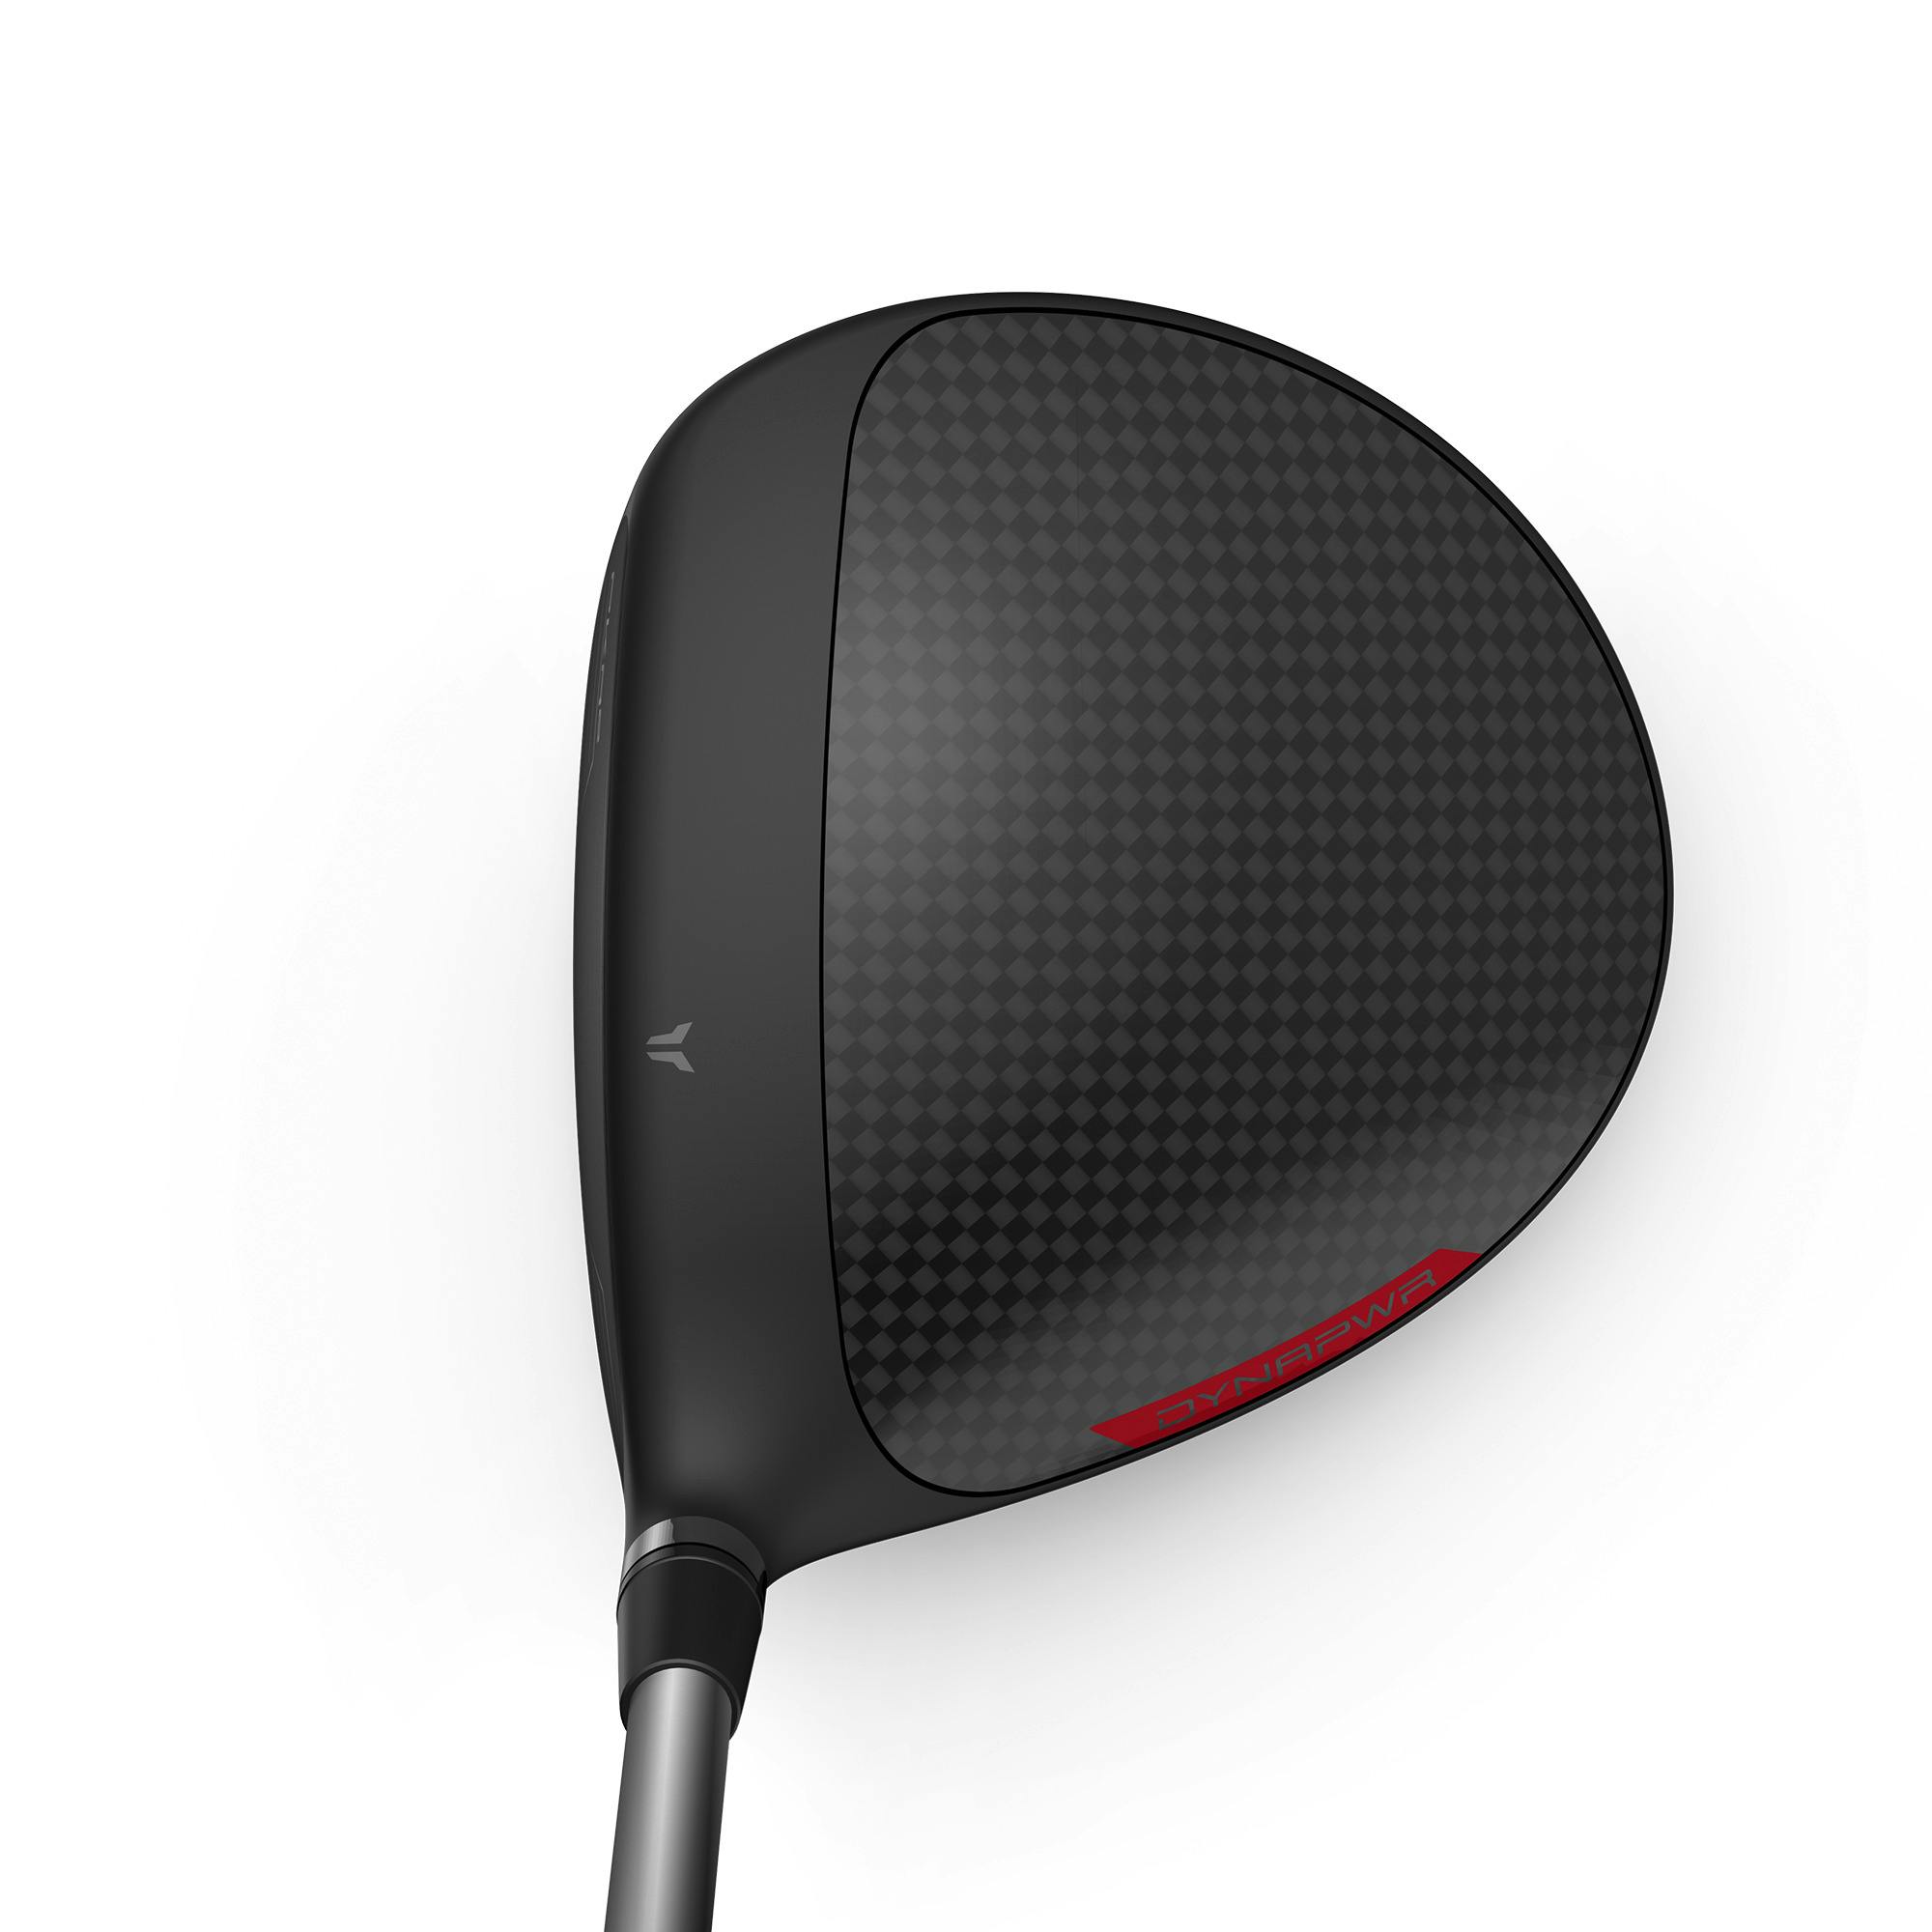 Wilson Dynapower Carbon Driver  · Right handed · Stiff · 10.5°